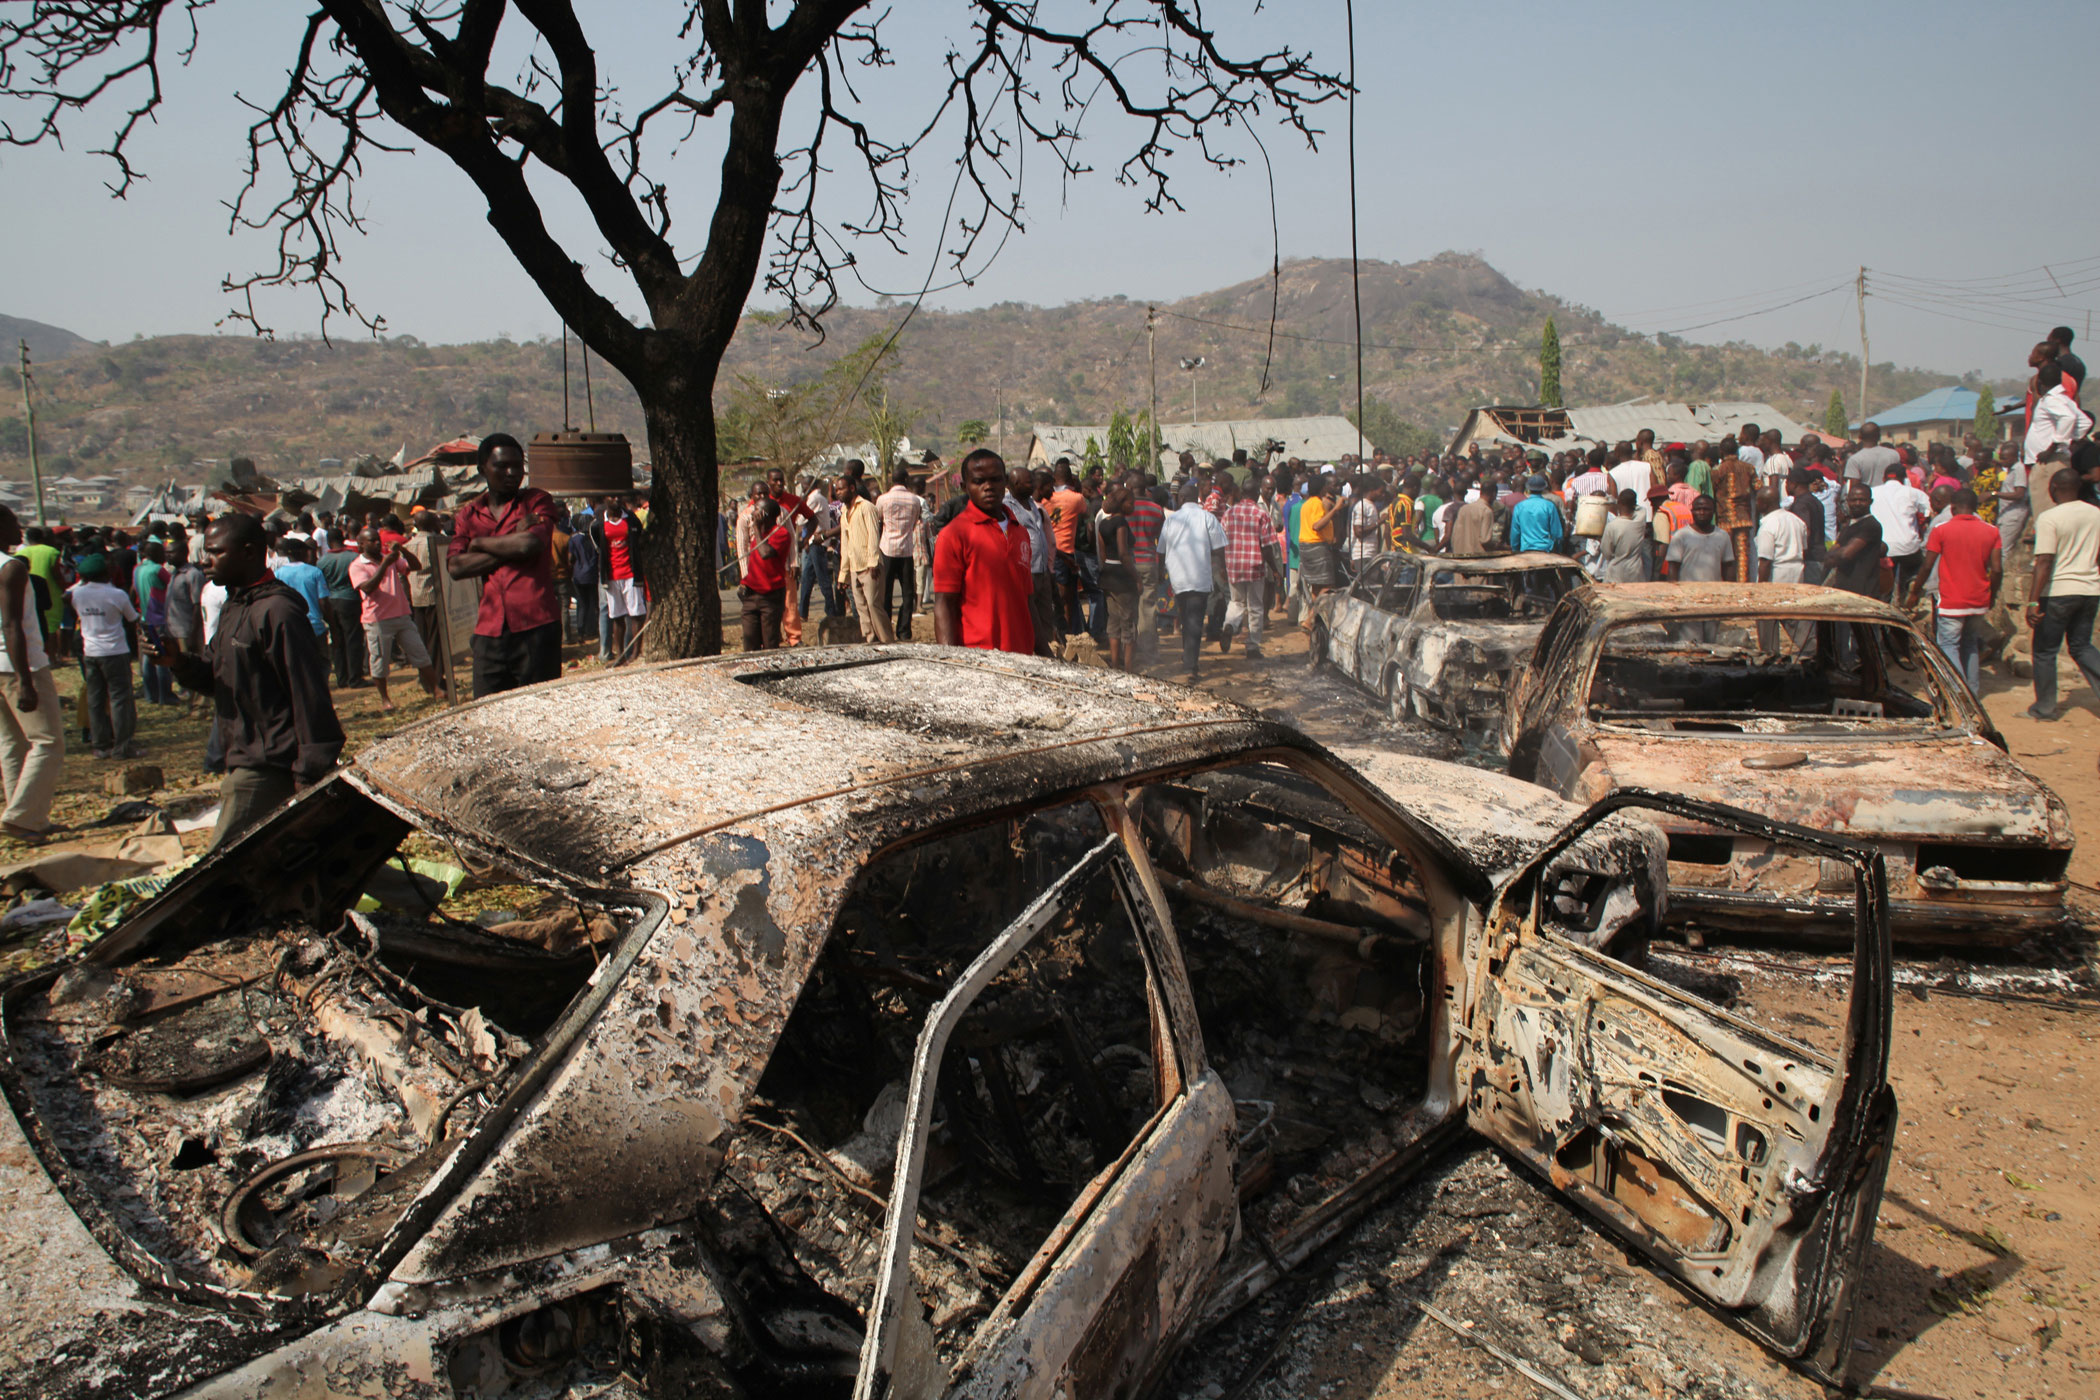 People gather around burnt cars near a Catholic church after a bomb blast in Nigeria’s capital, Abuja, on December 25, 2011. (Sunday Aghaeze/Getty Images)